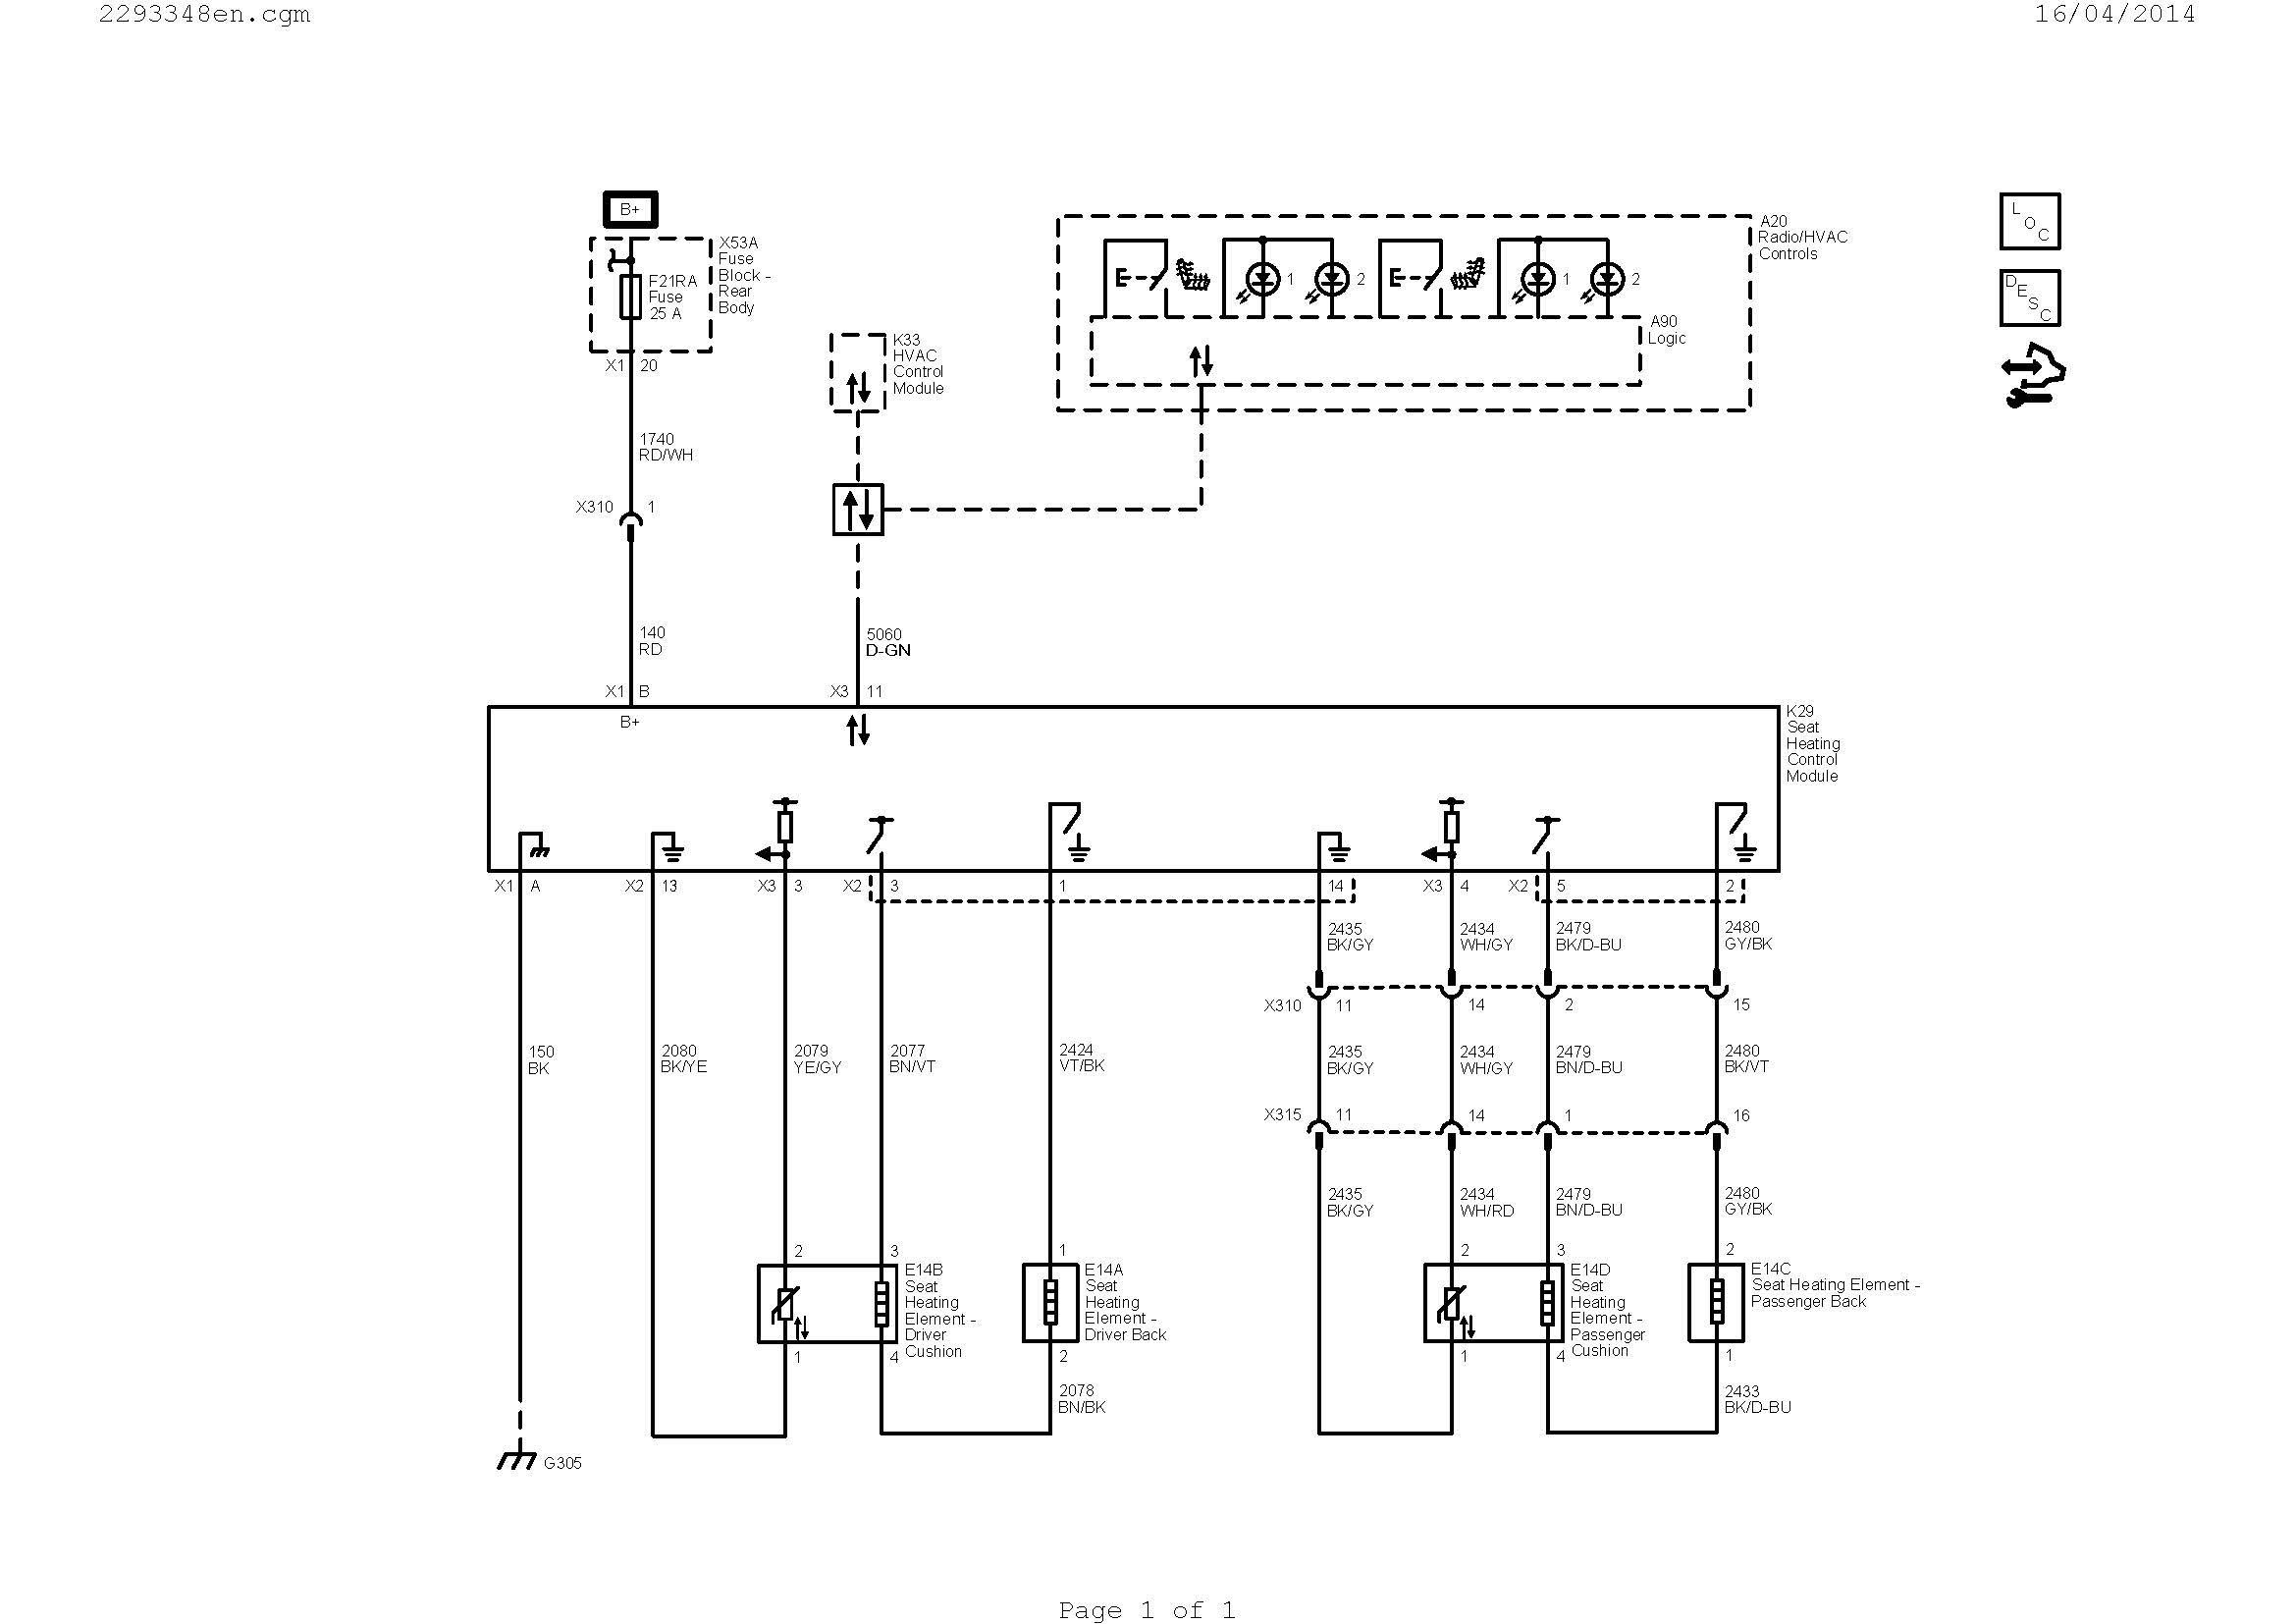 Wiring A Ac thermostat Diagram New Wiring Diagram Ac Valid Hvac Diagram Best Hvac Diagram 0d